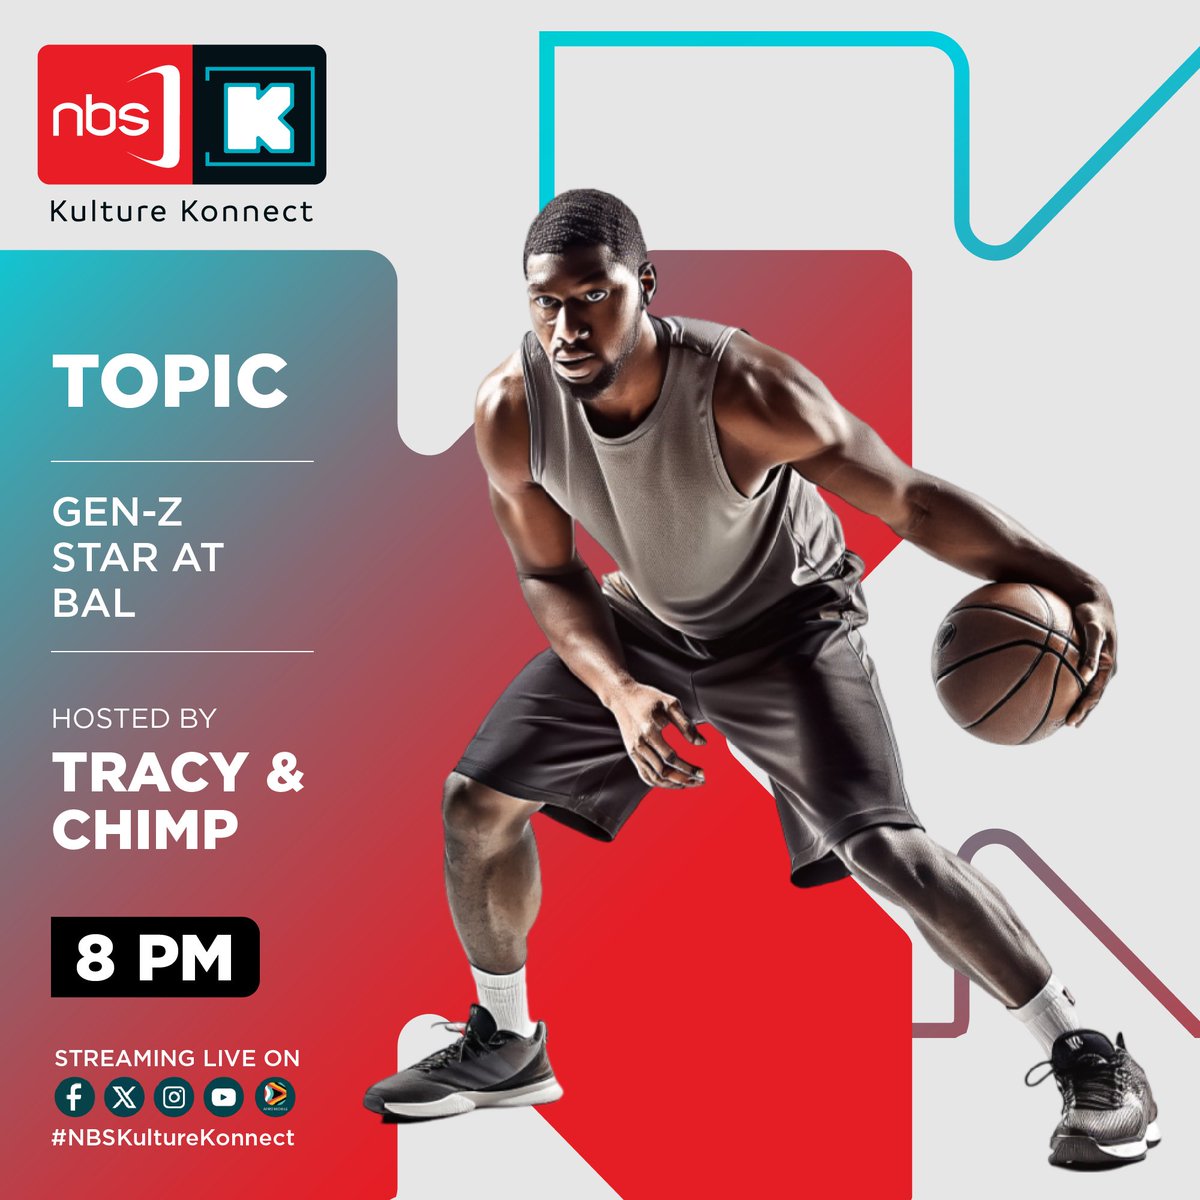 Join us tonight at 8 PM as we highlight the Gen Z Star at the BAL on #NBSKultureKonnect.

#NextKulture